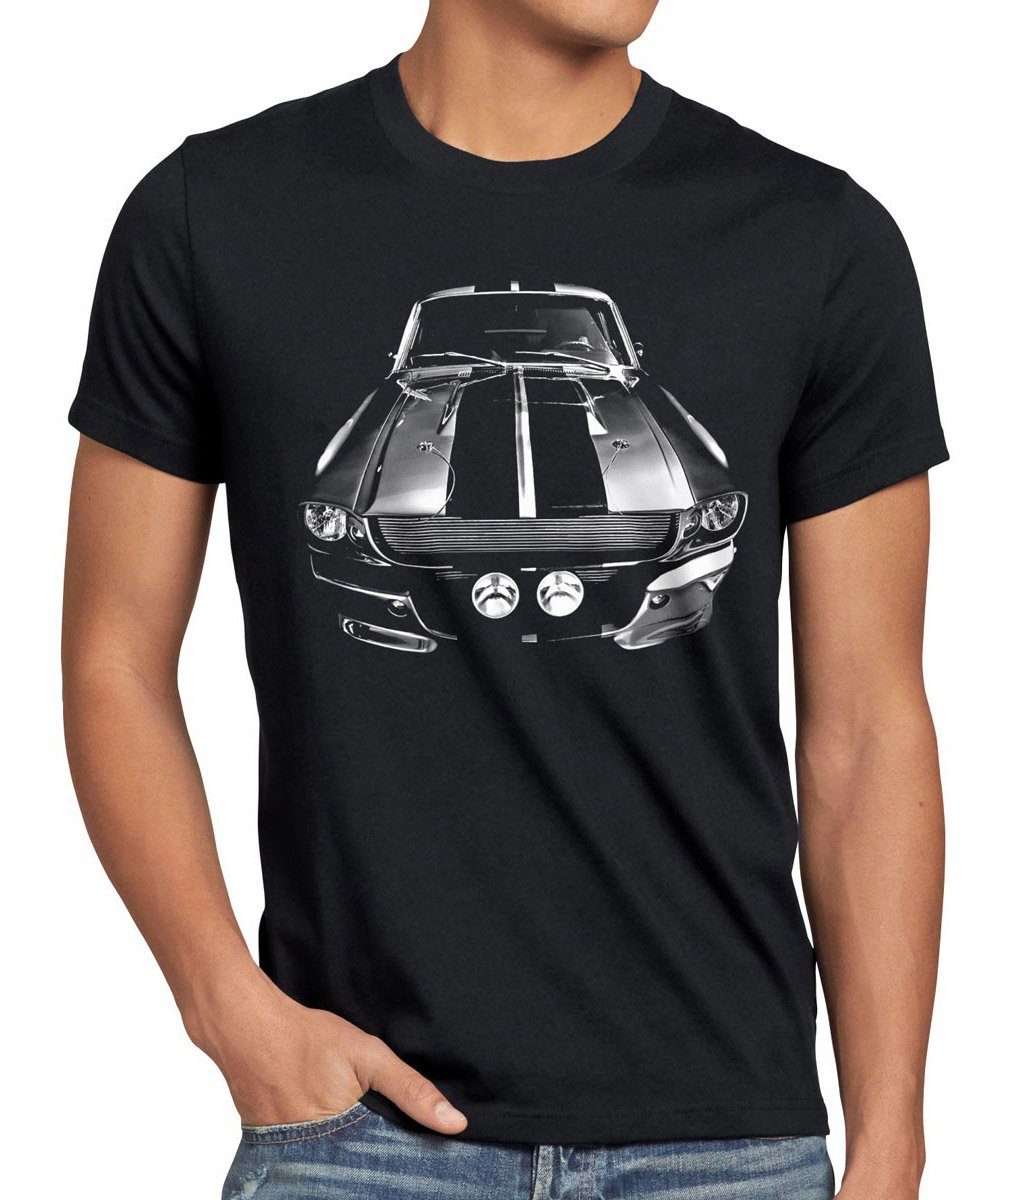 style3 Print-Shirt Herren T-Shirt Mustang ford shelby gt500 v8 rock us car muscle eleanor usa pony